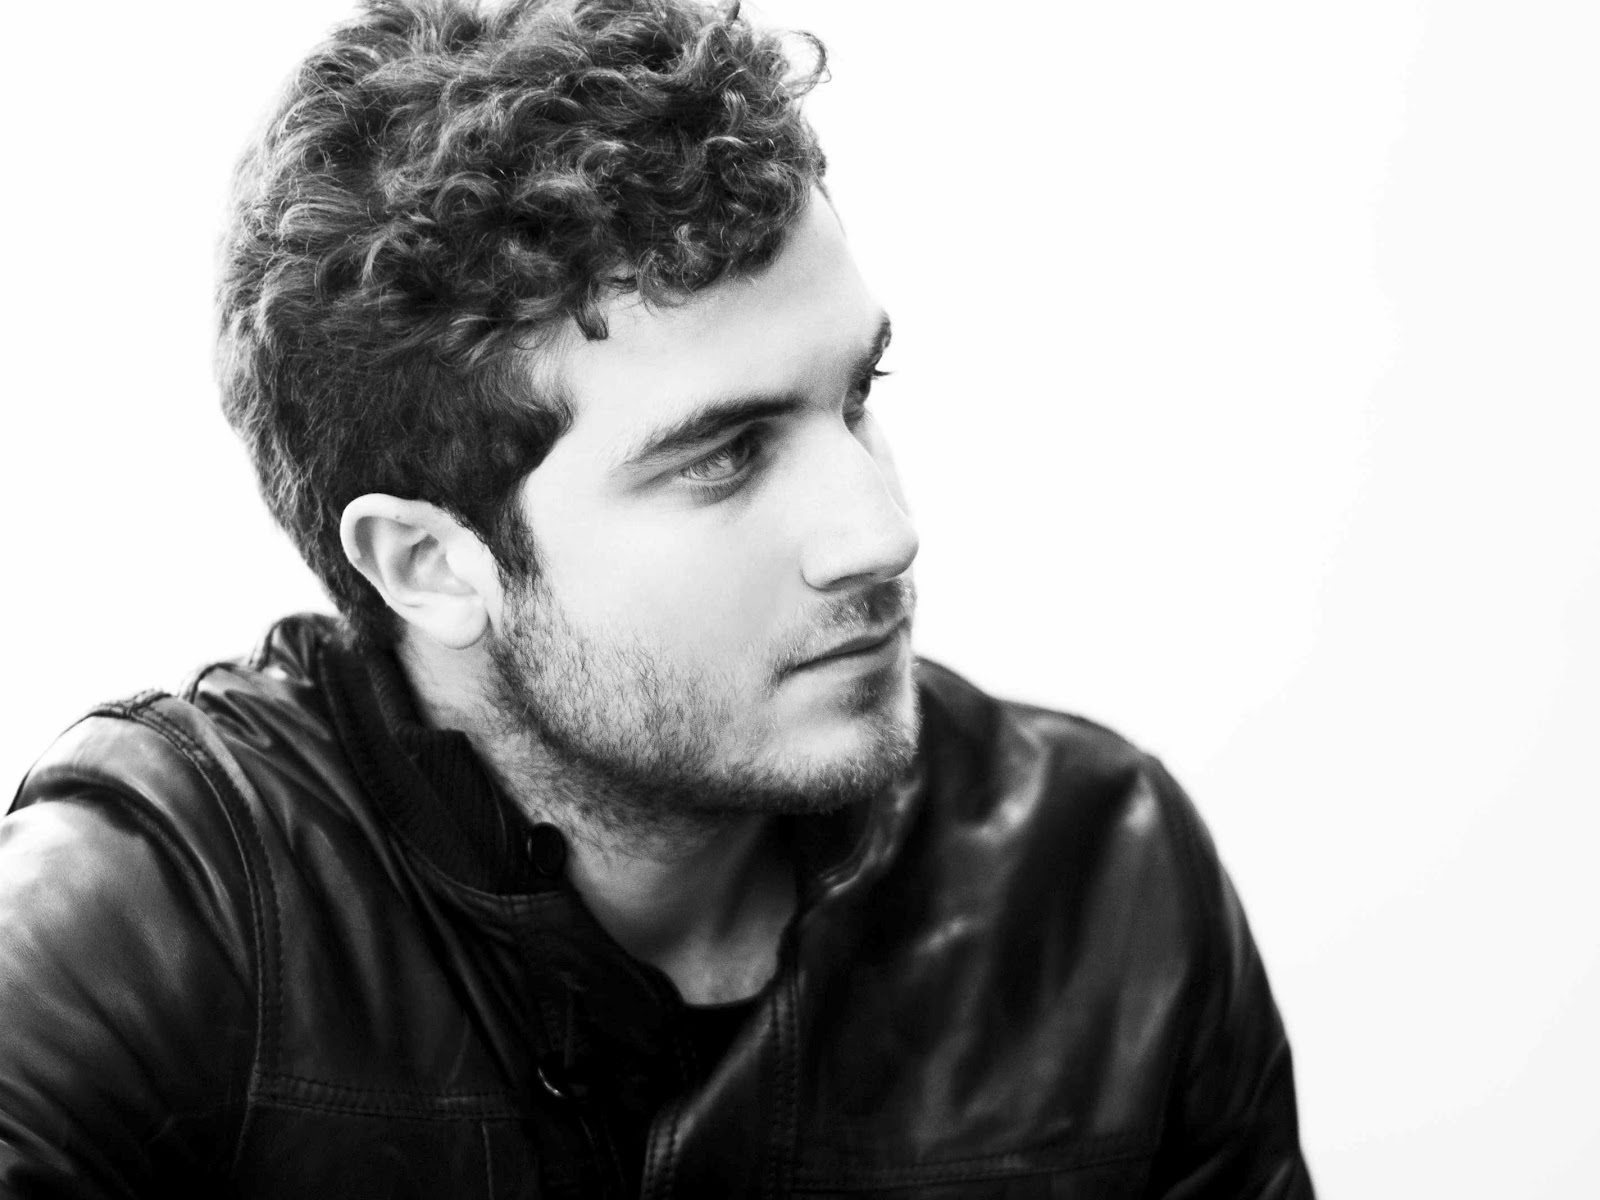 Nicolas Jaar shares details of 'Sirens' LP, the album comes out on October 1st via Other People.